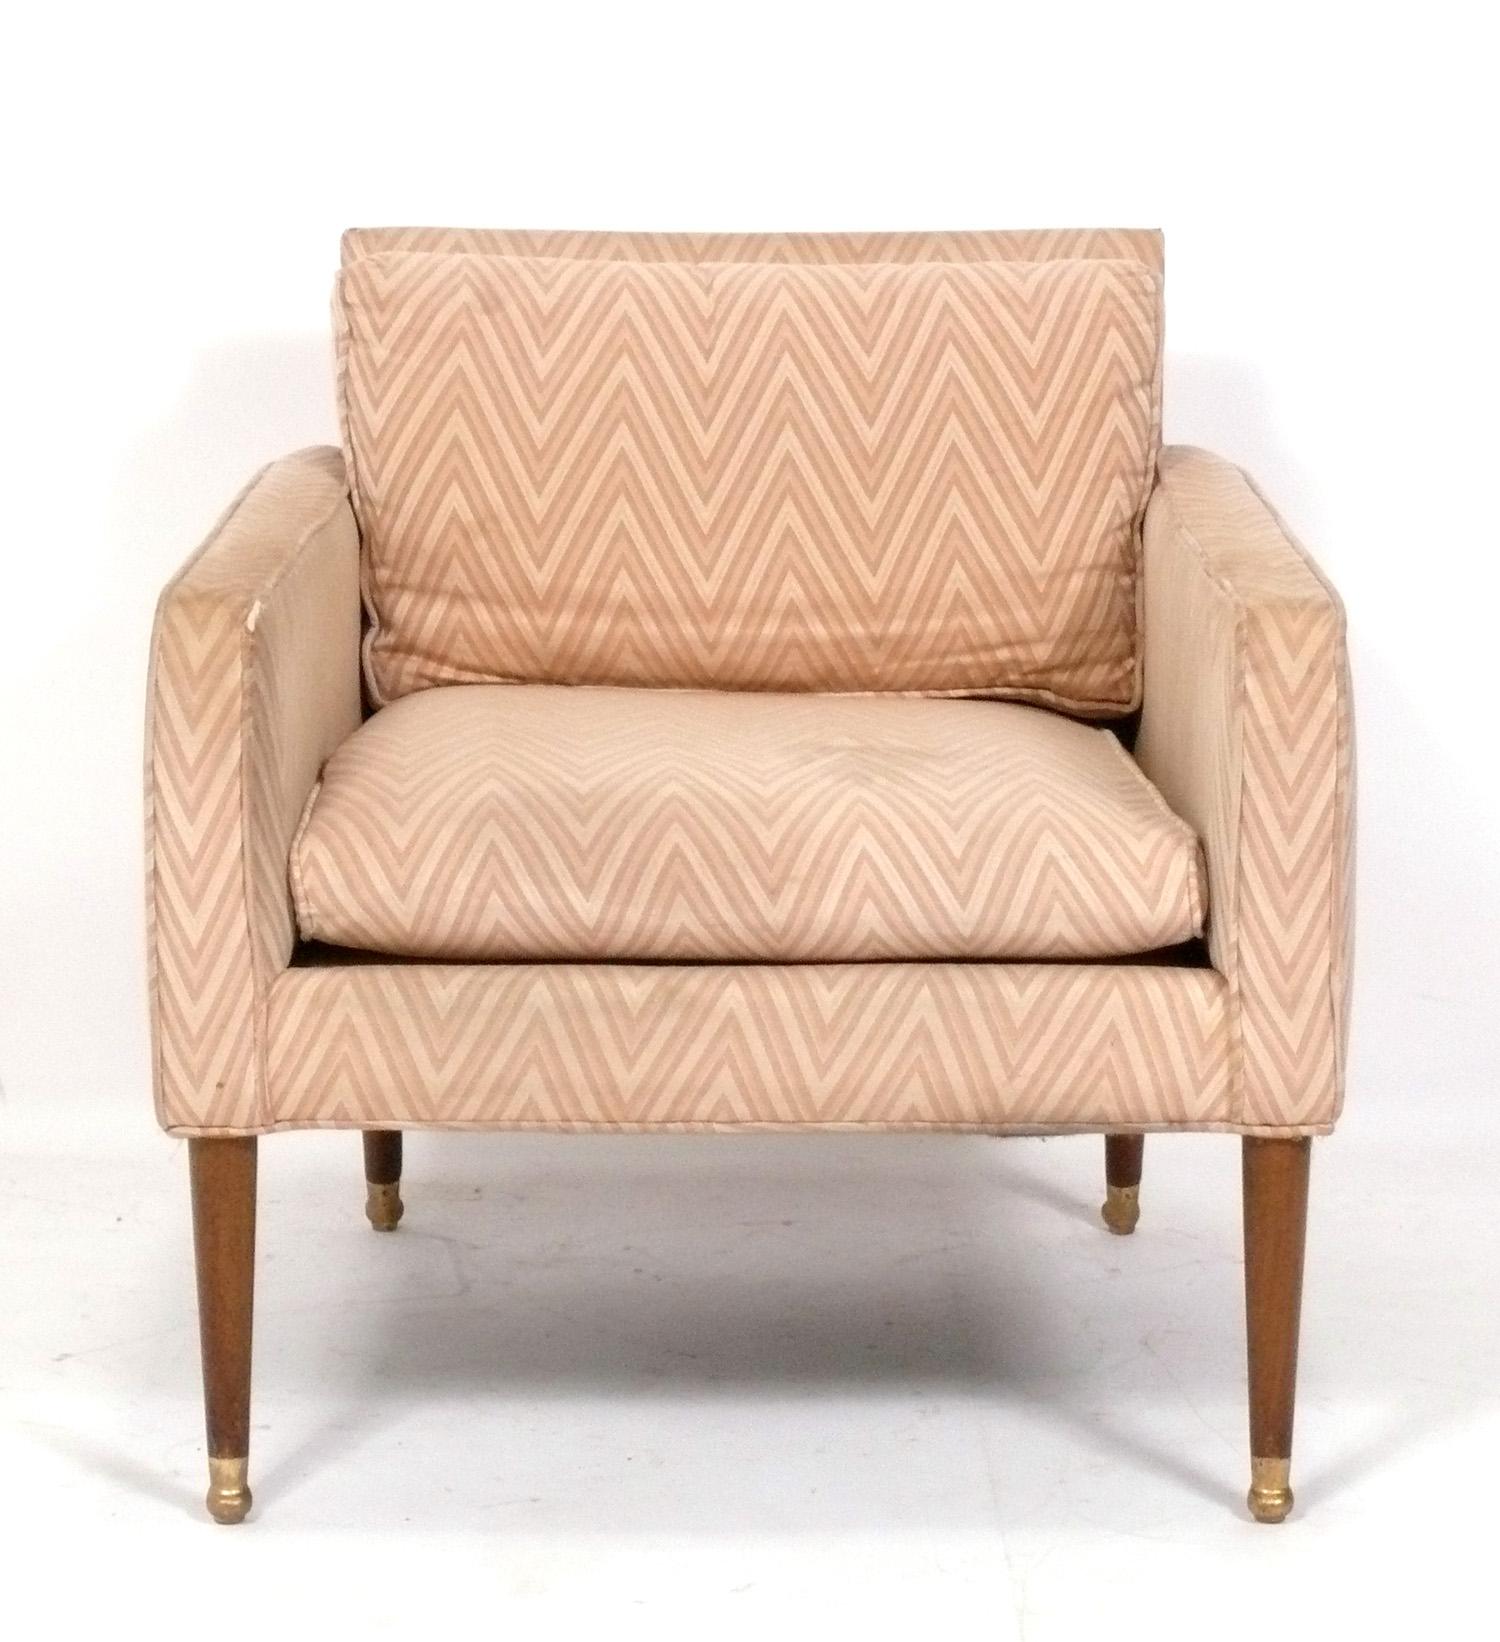 Elegant French lounge chair, France, circa 1940s. This chair is being completely reupholstered, and can be completed in your fabric. Simply send us 6 yards of your fabric after purchase.